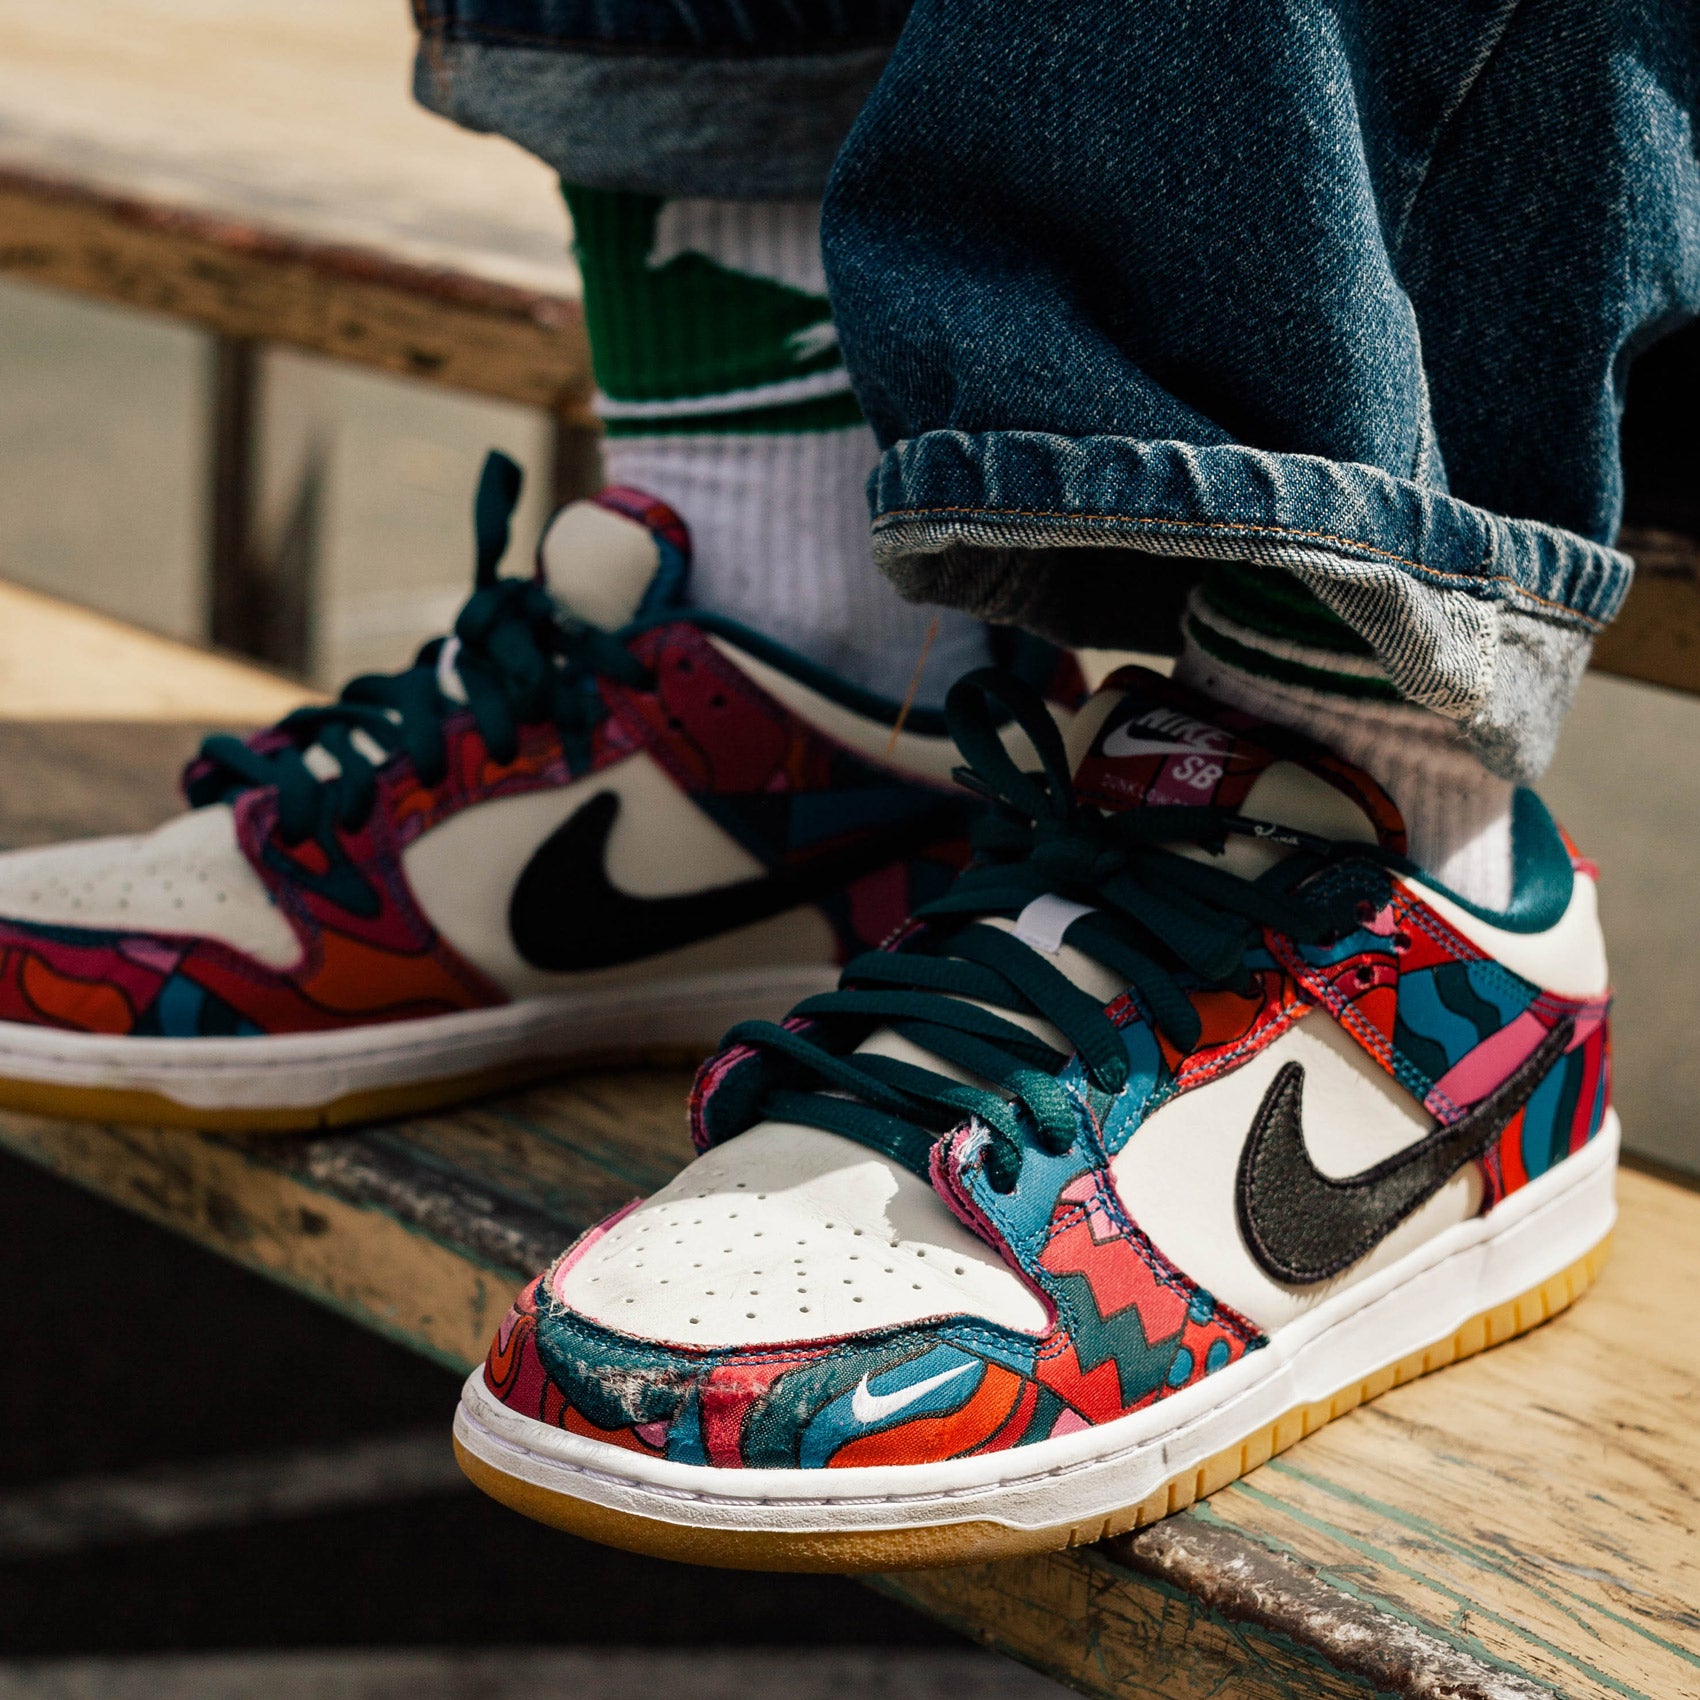 Nike SB x Parra "Abstract Art" Olympic Dunk Drawing